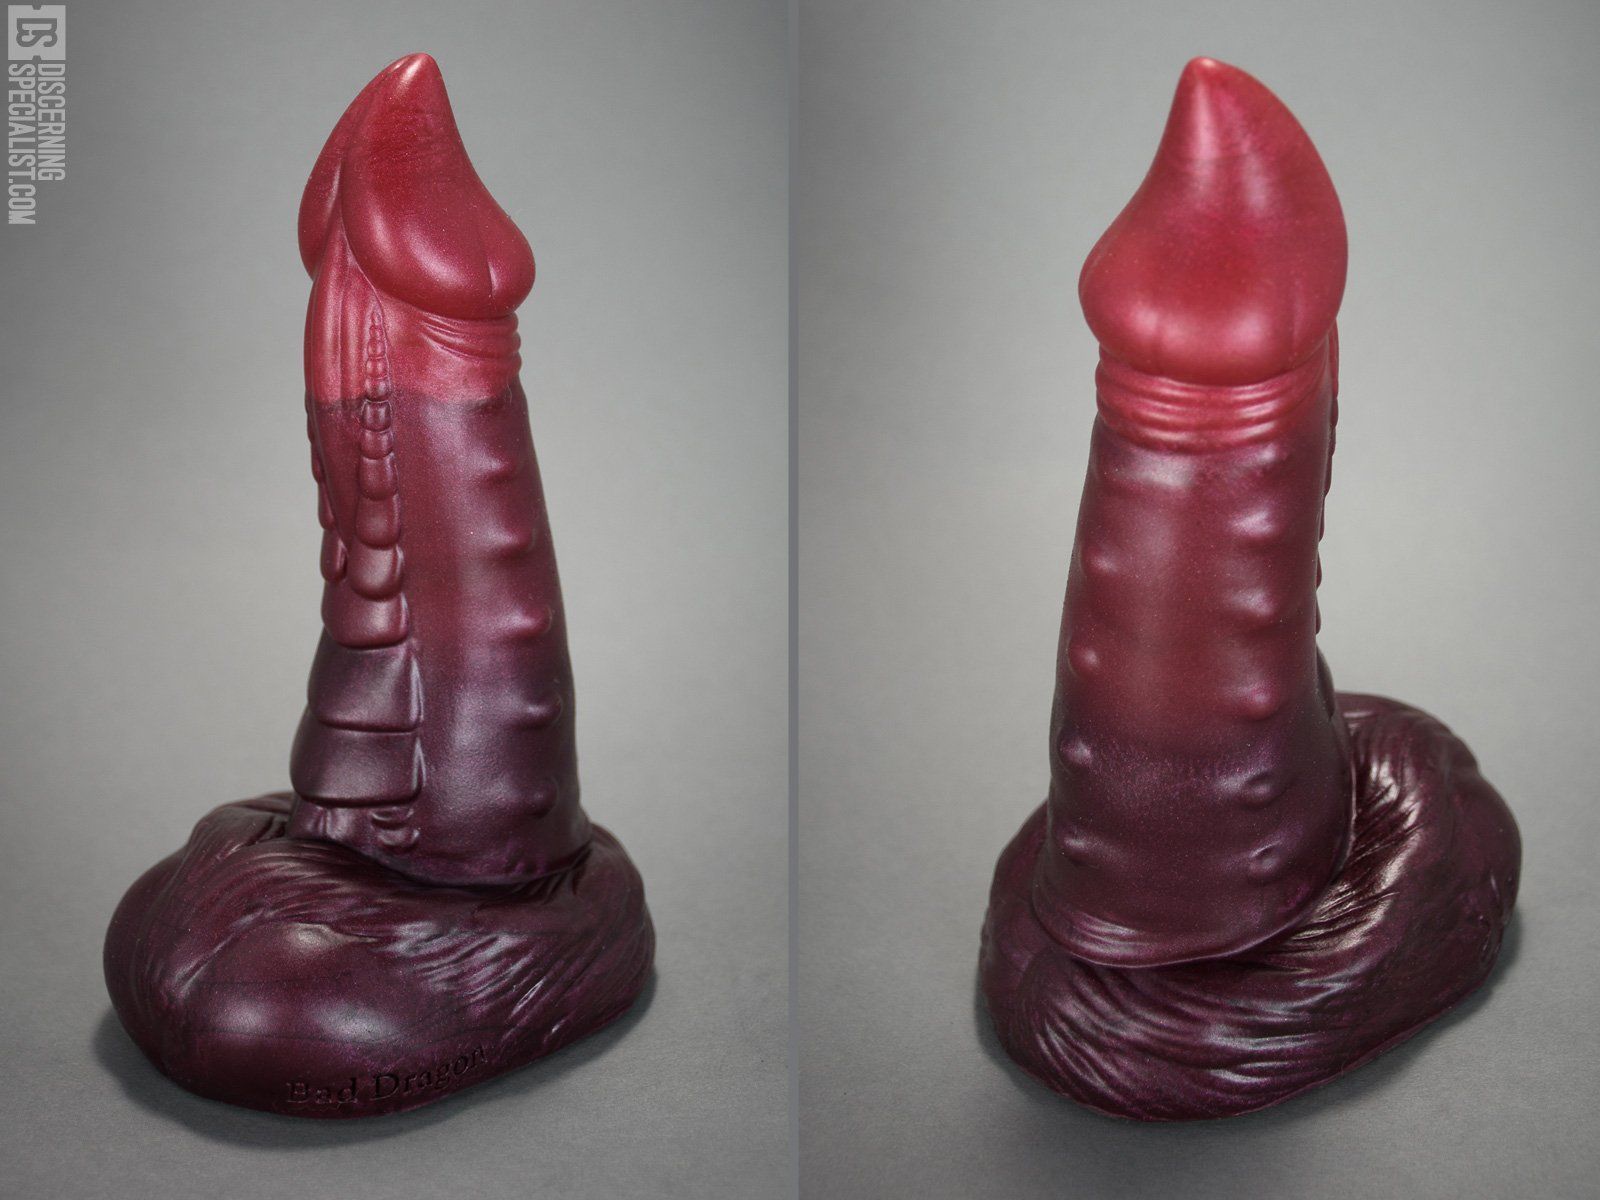 Painful dildo pictures